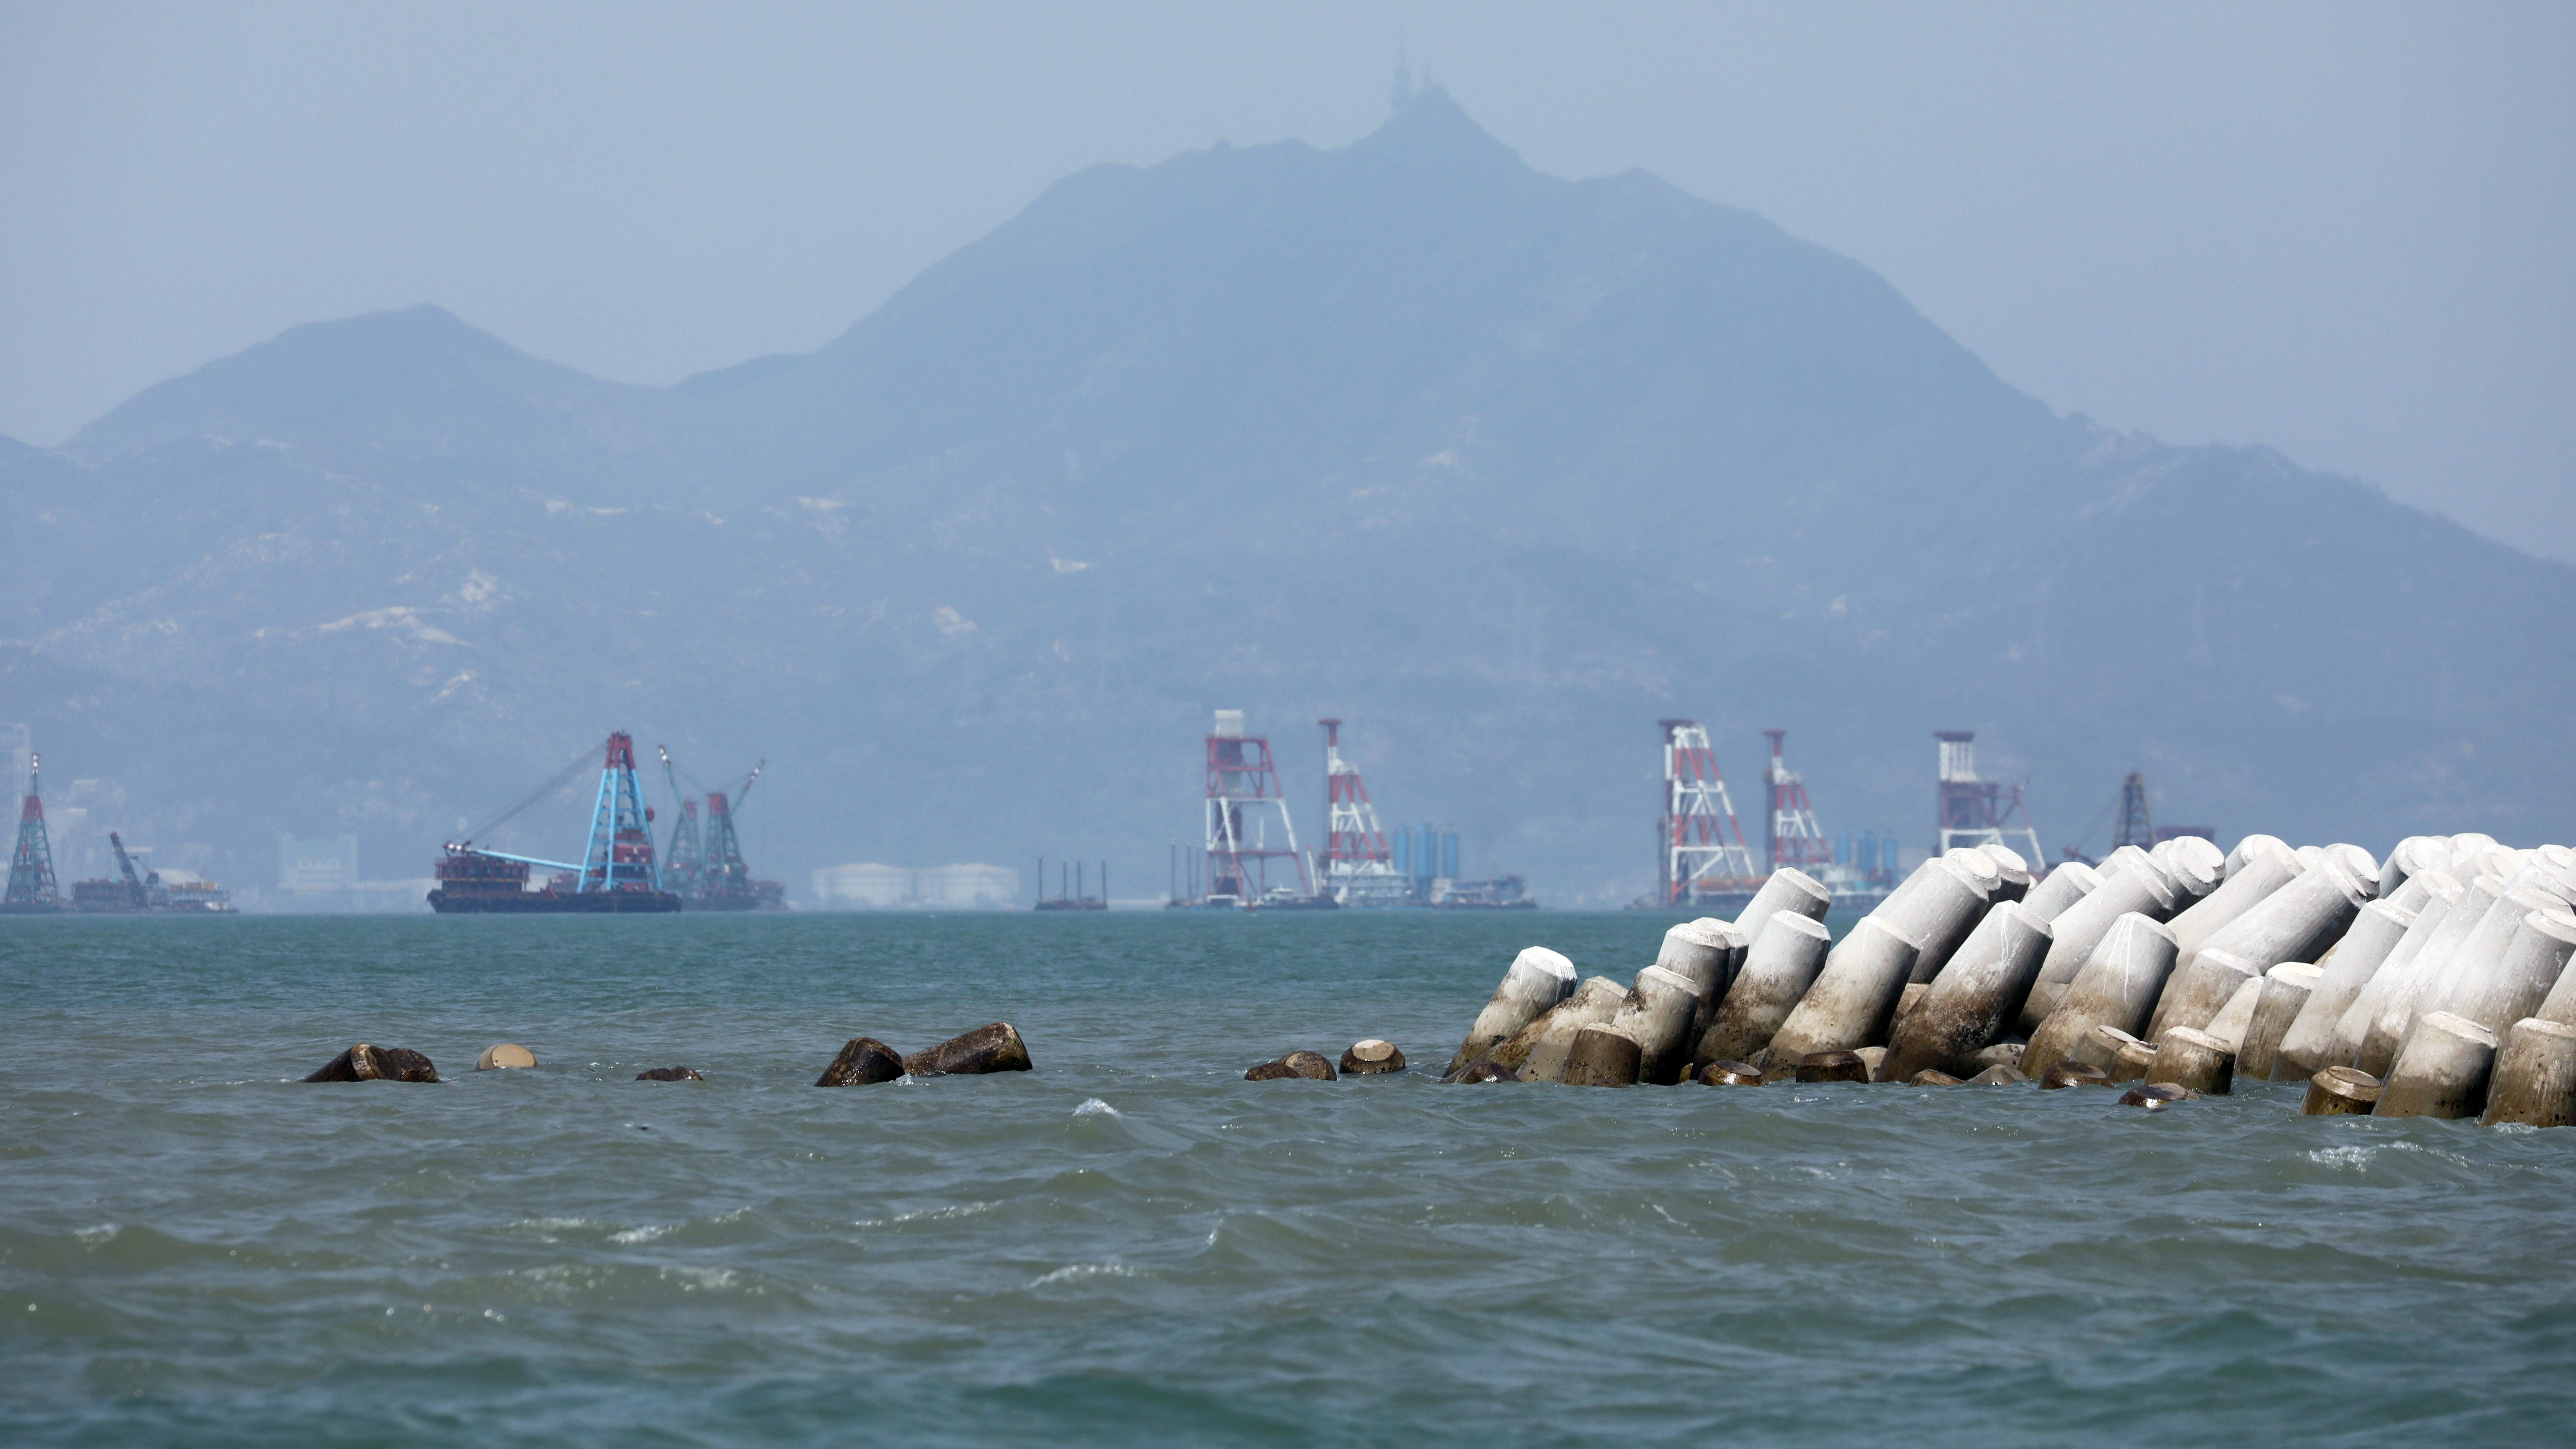 Concrete tetrapods, supposed to protect the edges of an artificial island that is part of the Hong Kong-Zhuhai-Macau bridge project, appear to have been collapsing and drifting away. Photo: May Tse